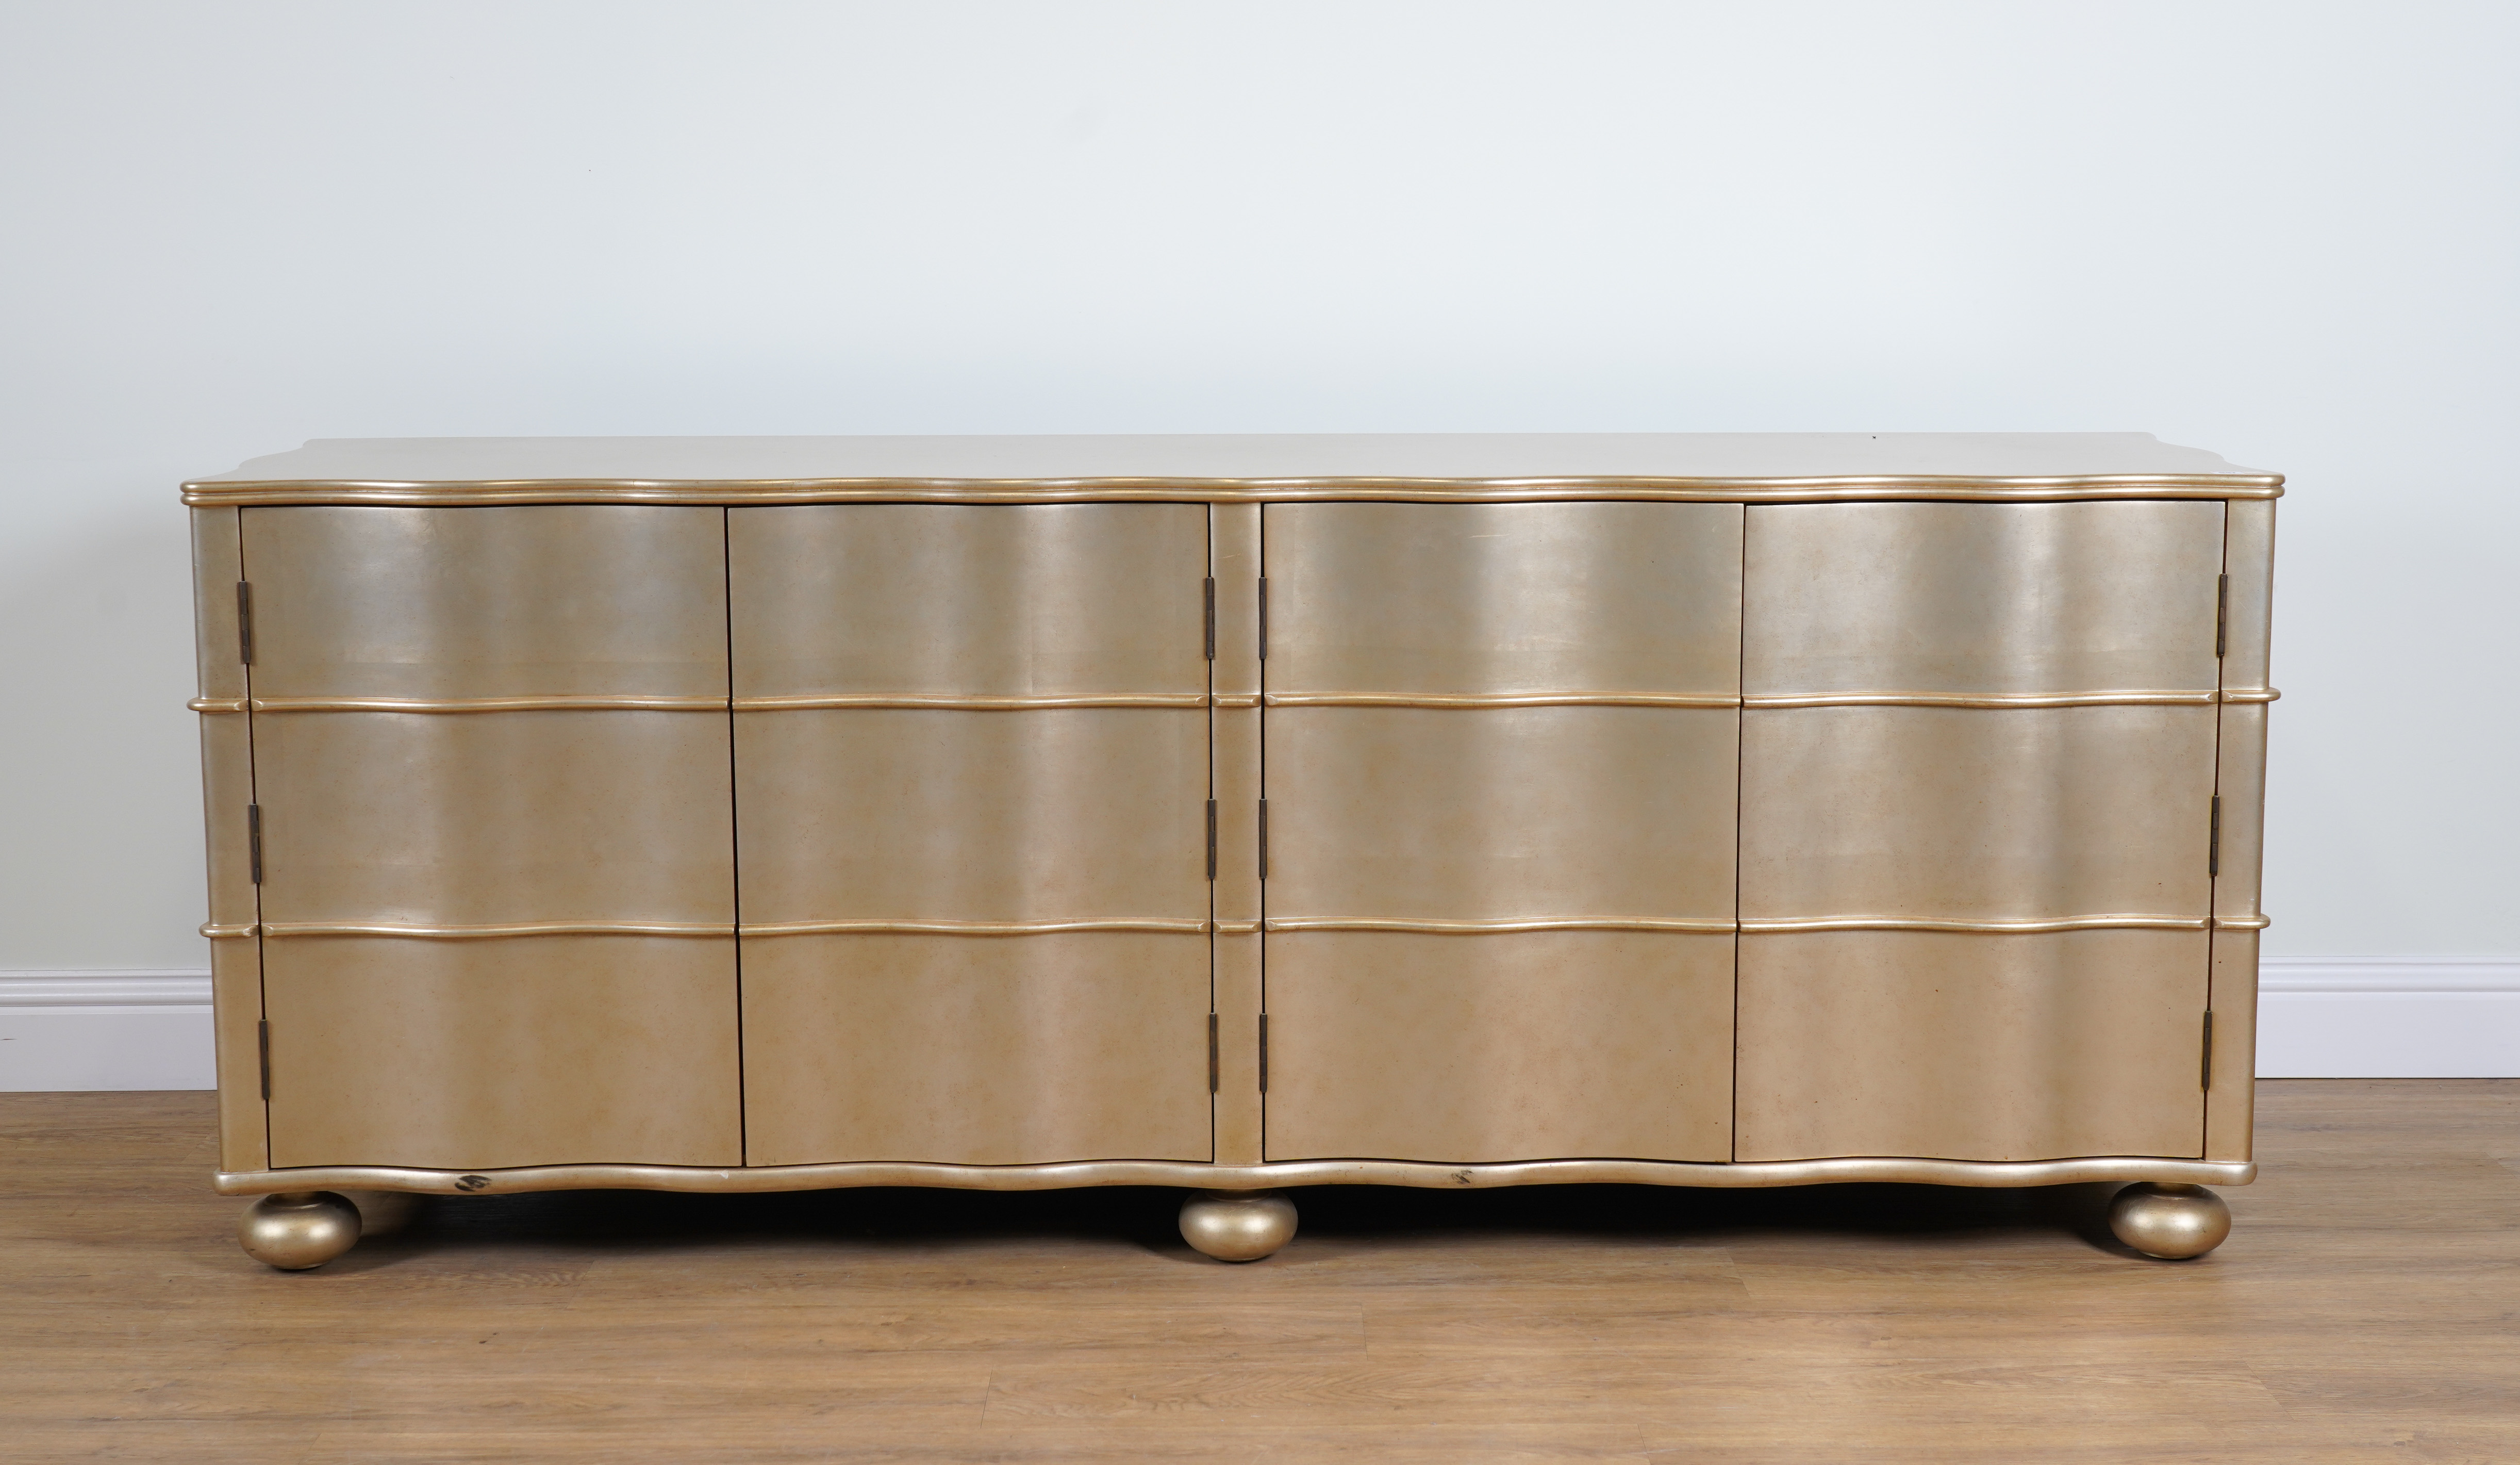 PAUL MARTIN; A GOLD PAINTED WAVY FRONTED FOUR DOOR LOW CABINET